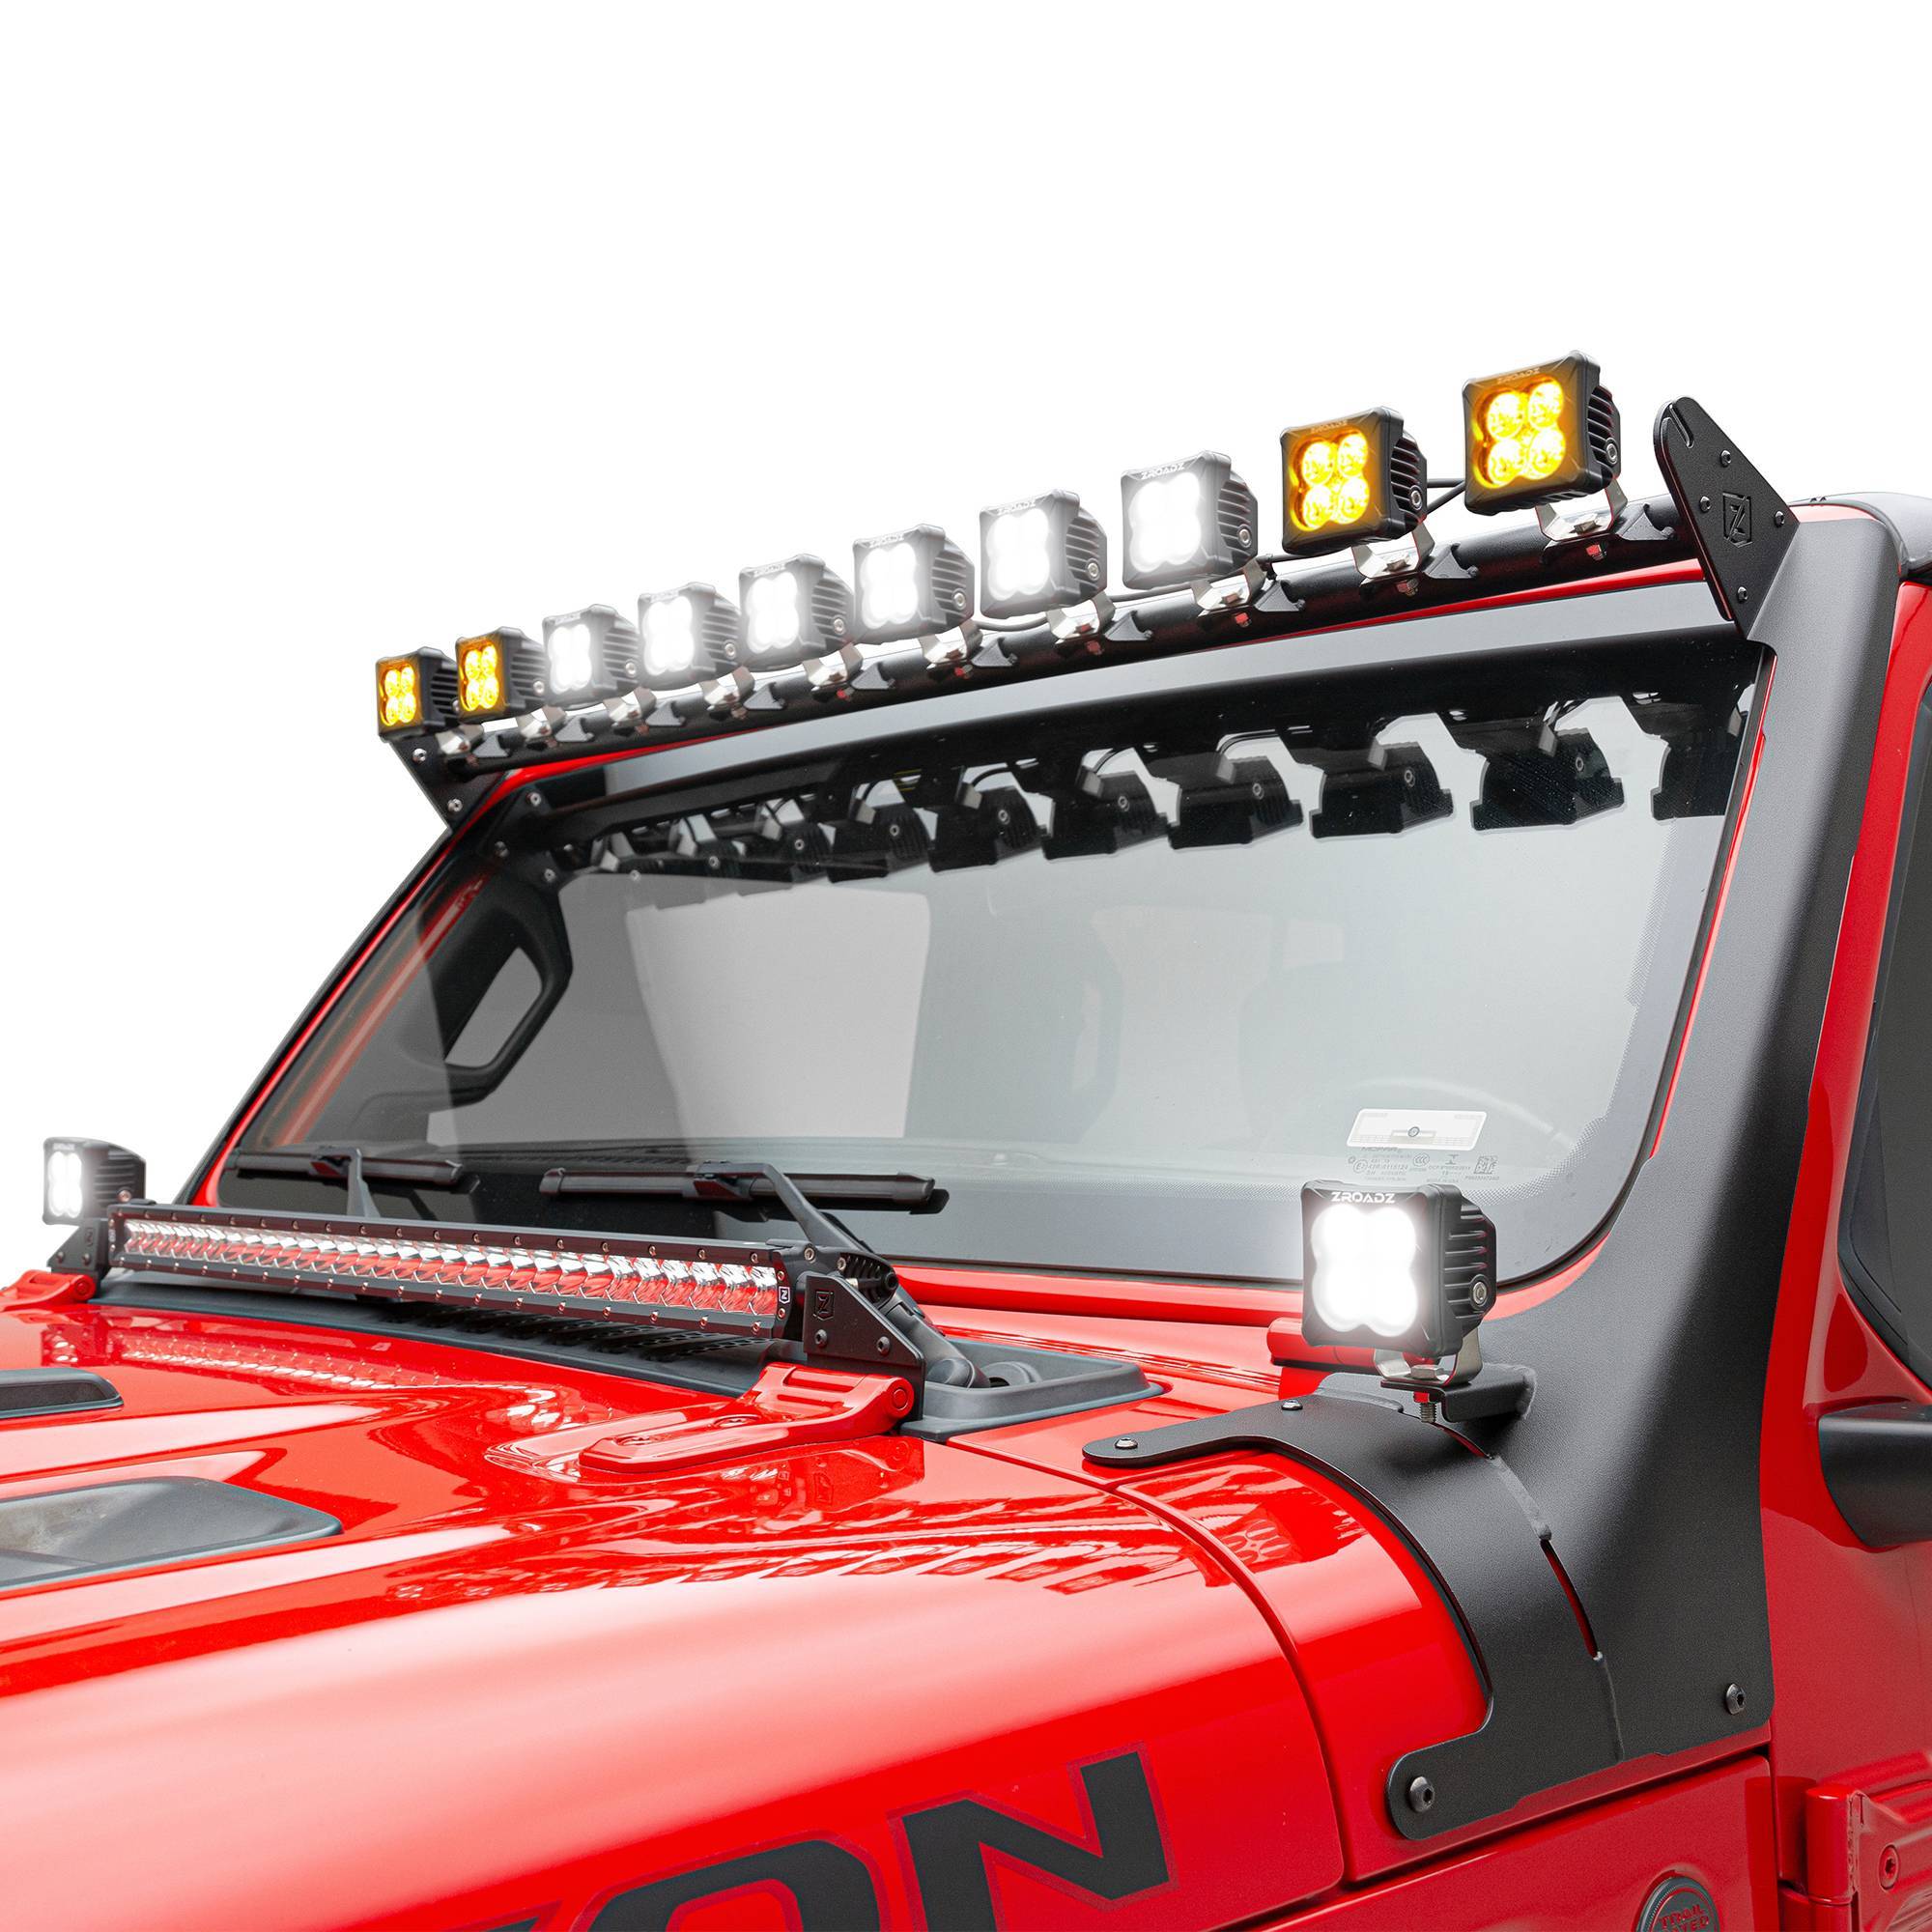 ZROADZ OFF ROAD PRODUCTS - 2019-2022 Jeep Gladiator, JL Multi-LED Roof Cross Bar and 2-Pod A-Pillar Complete KIT, Includes (12) 3-Inch ZROADZ Light Pods - Part # Z934931-KIT2AW